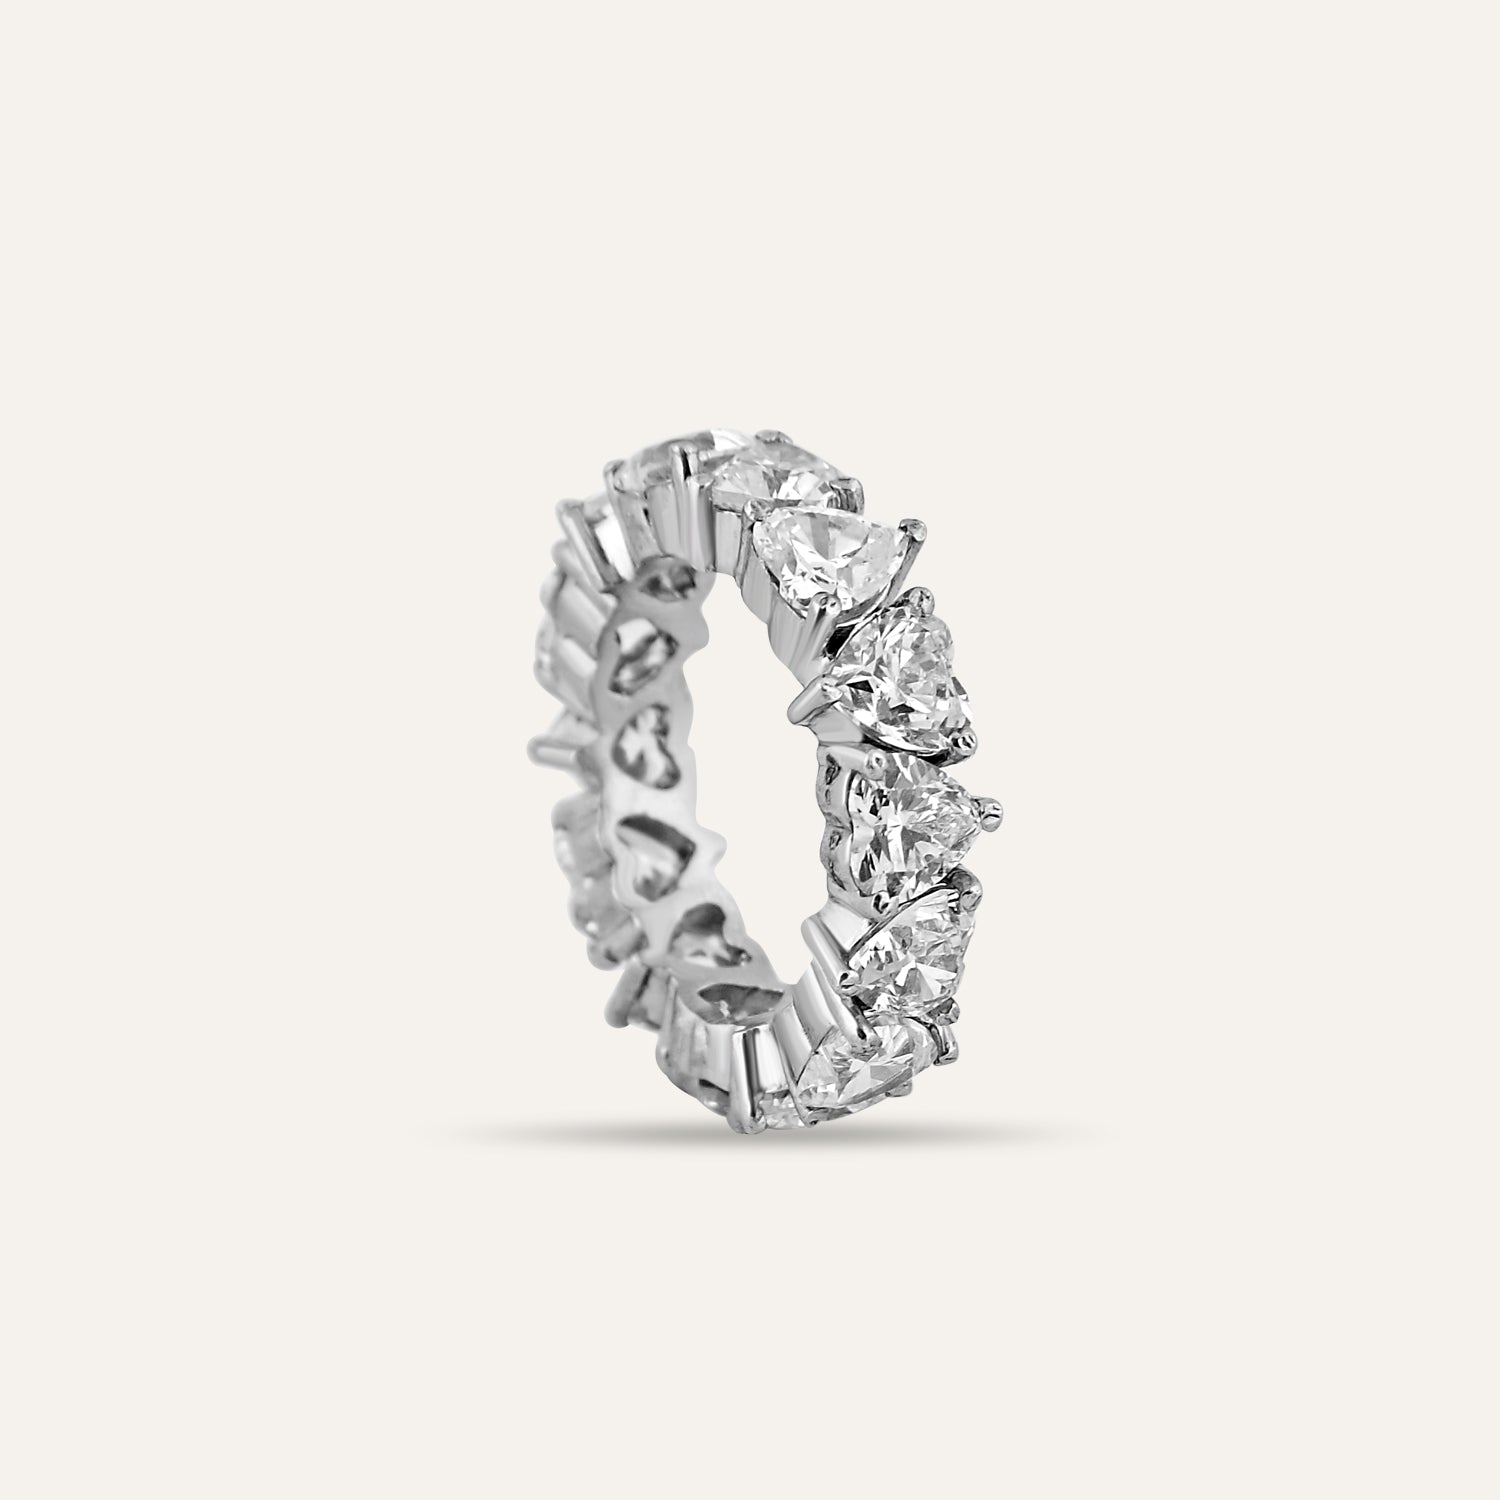 Ivy Sterling Silver Jewelry Ring - hypoallergenic jewelry